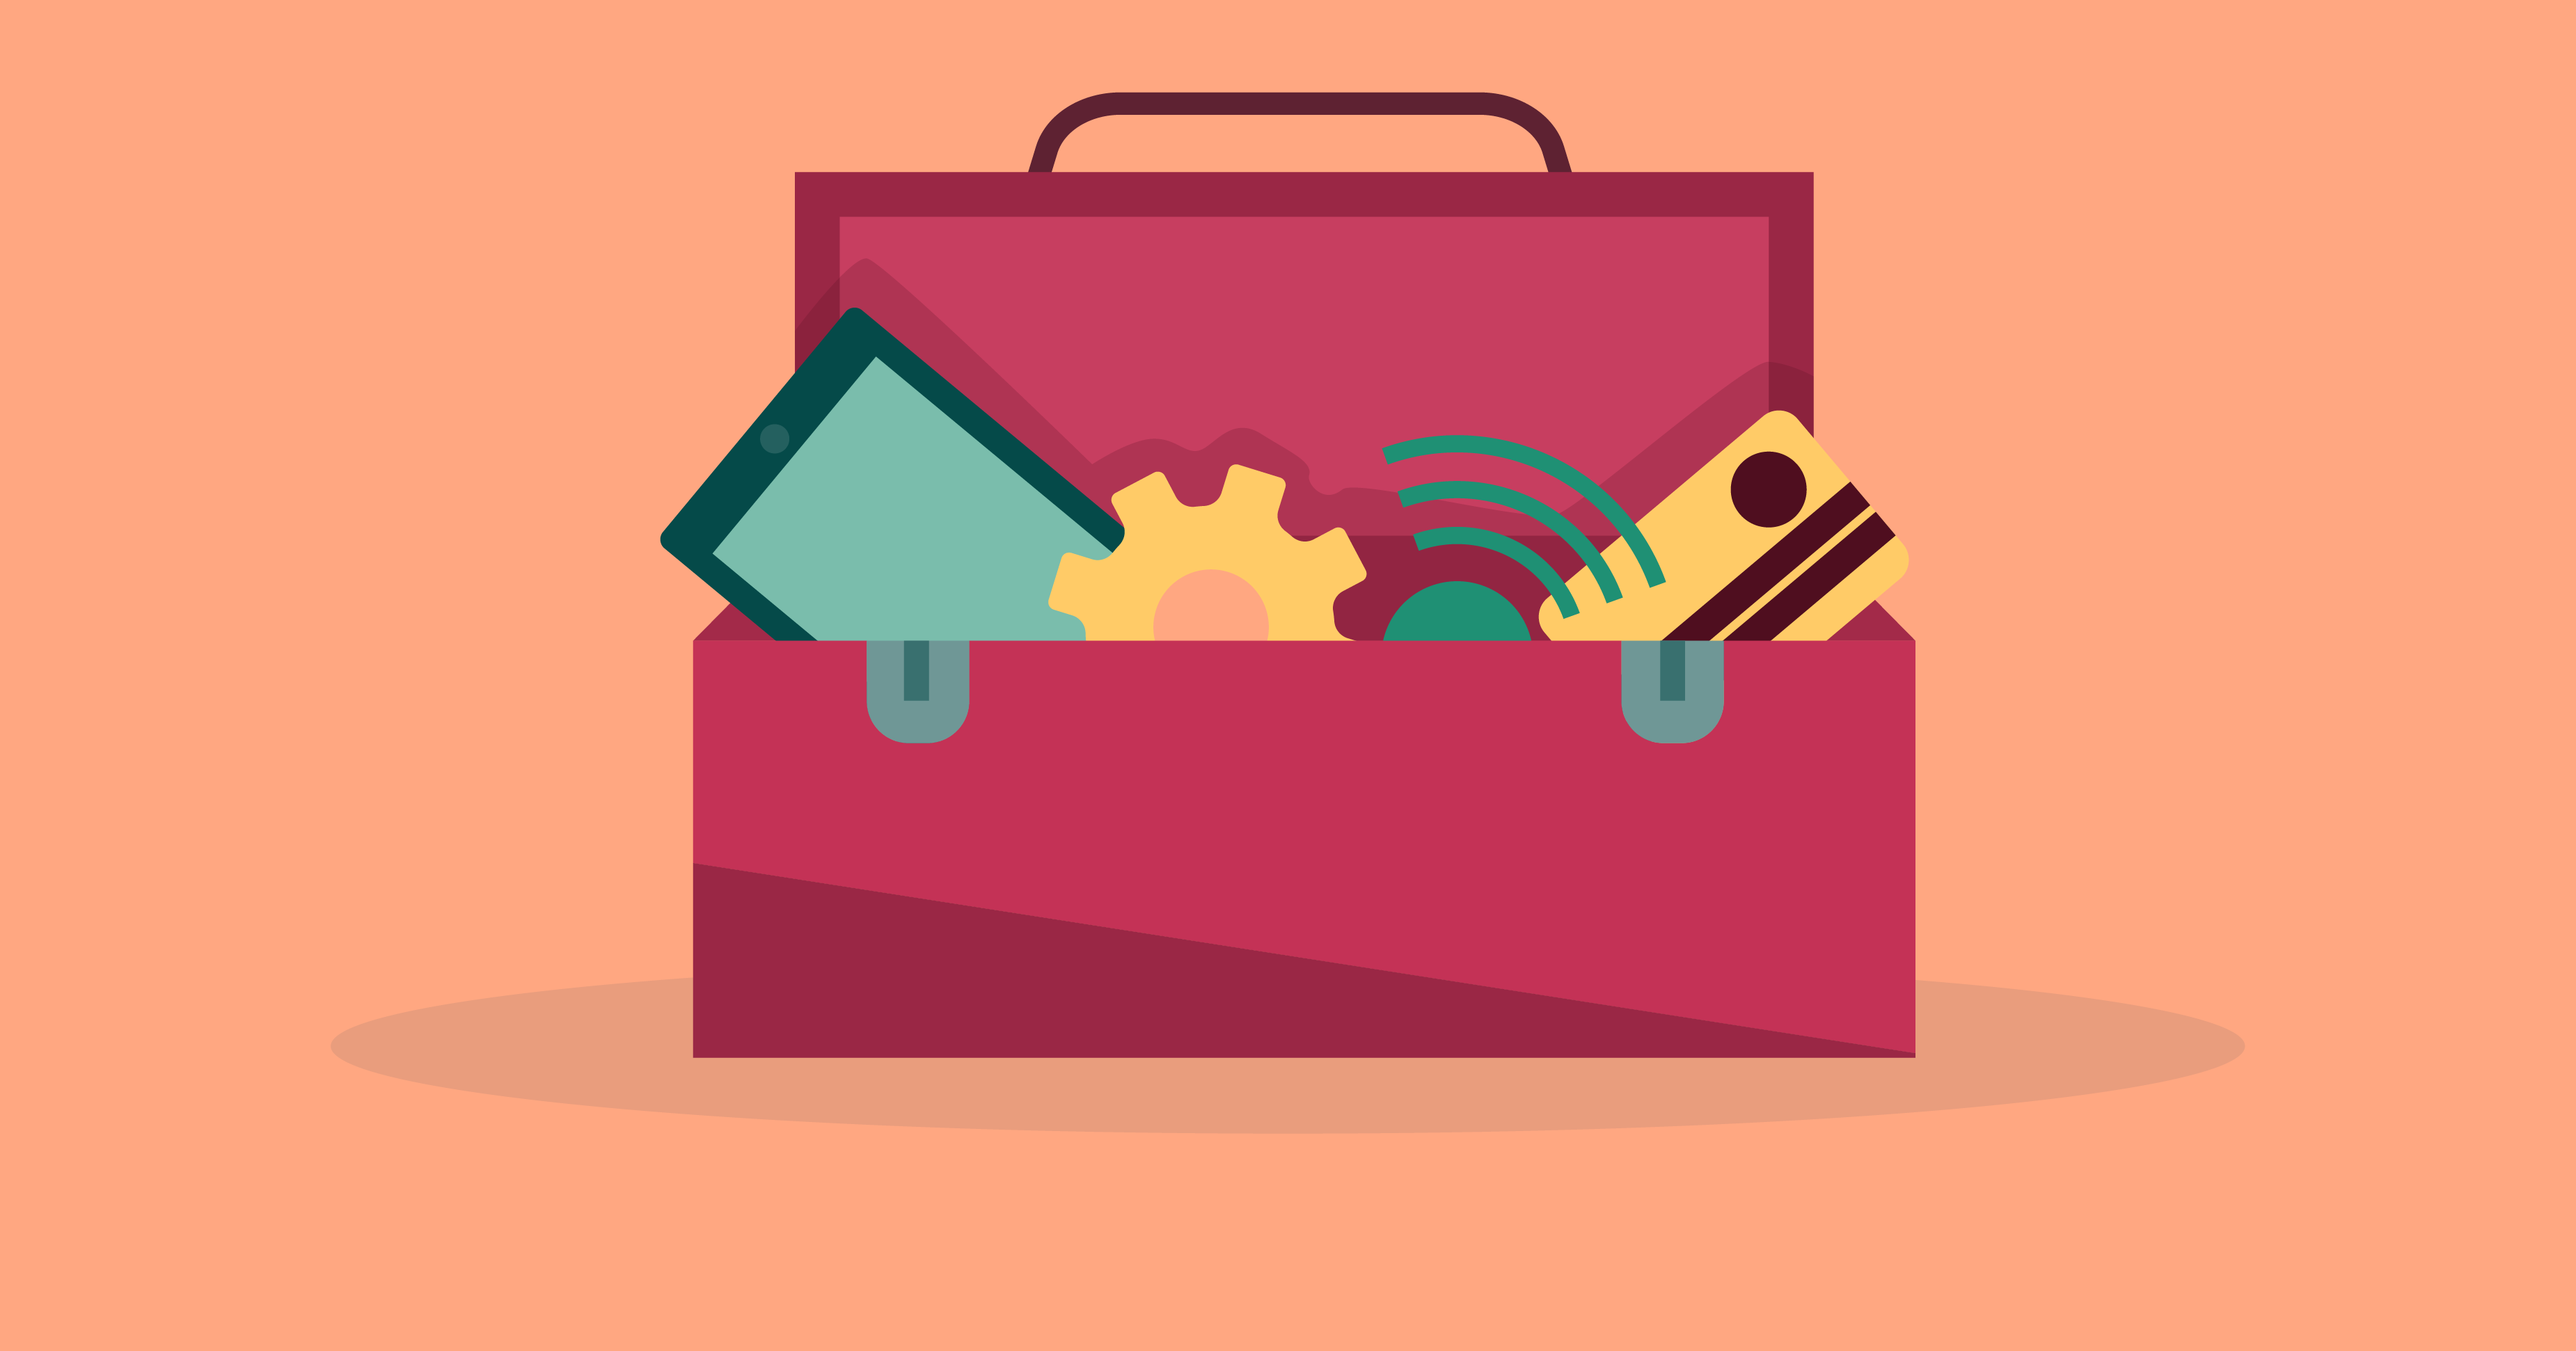 Illustration of a toolbox containing a tablet, credit card, a gear, and a volume icon.